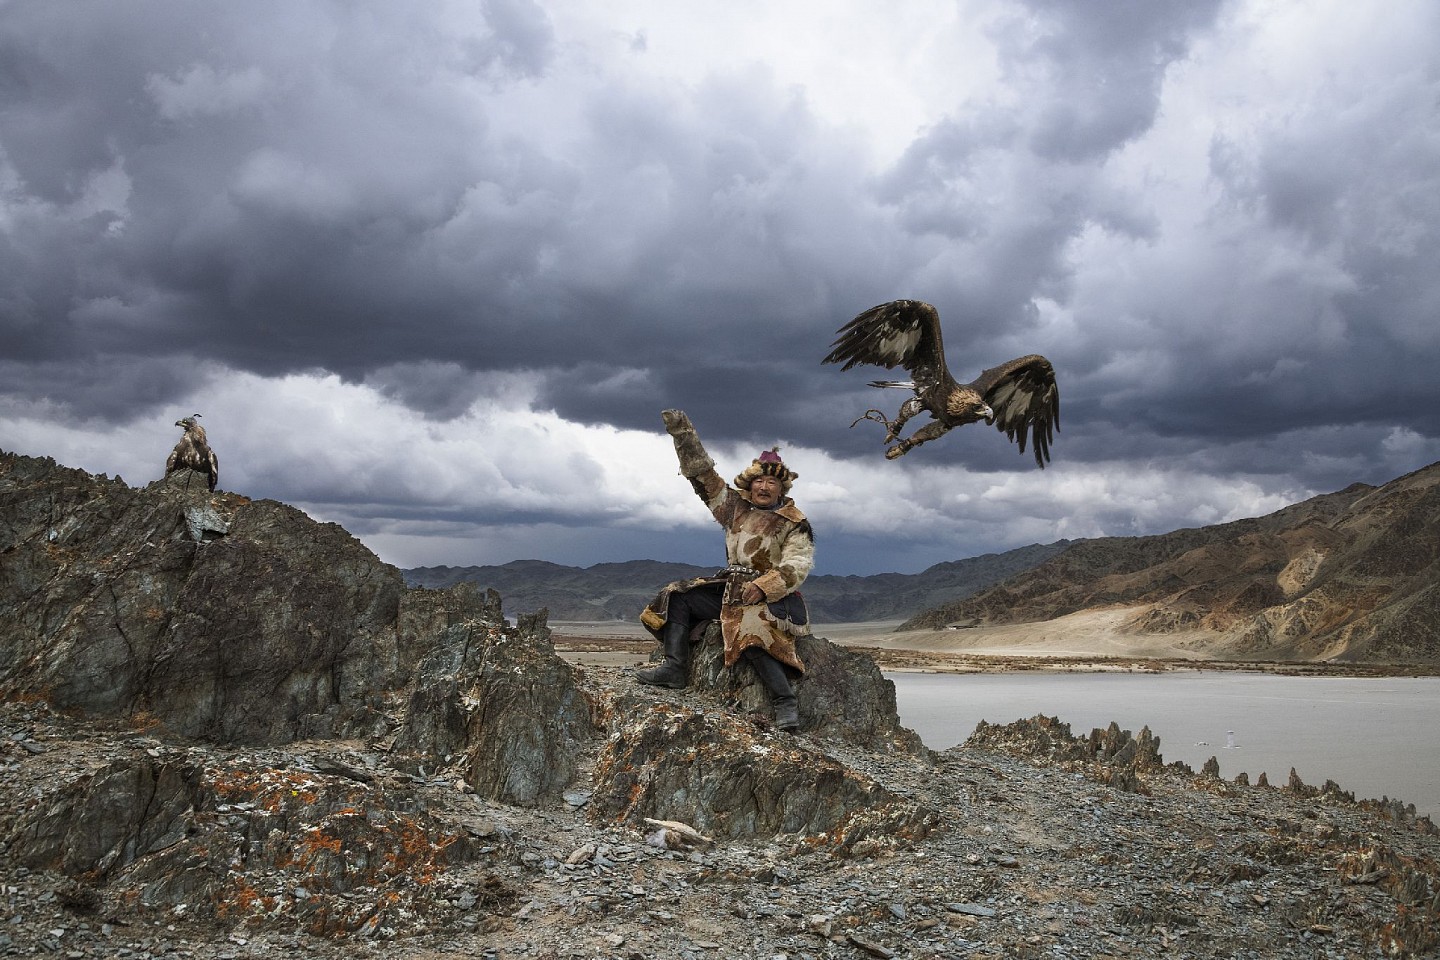 Steve McCurry, Man Hunts with Eagle, Ed. of 15
FujiFlex Crystal Archive Print, 30 x 40 in. (76.2 x 101.6 cm)
MONGOLIA-10025NF